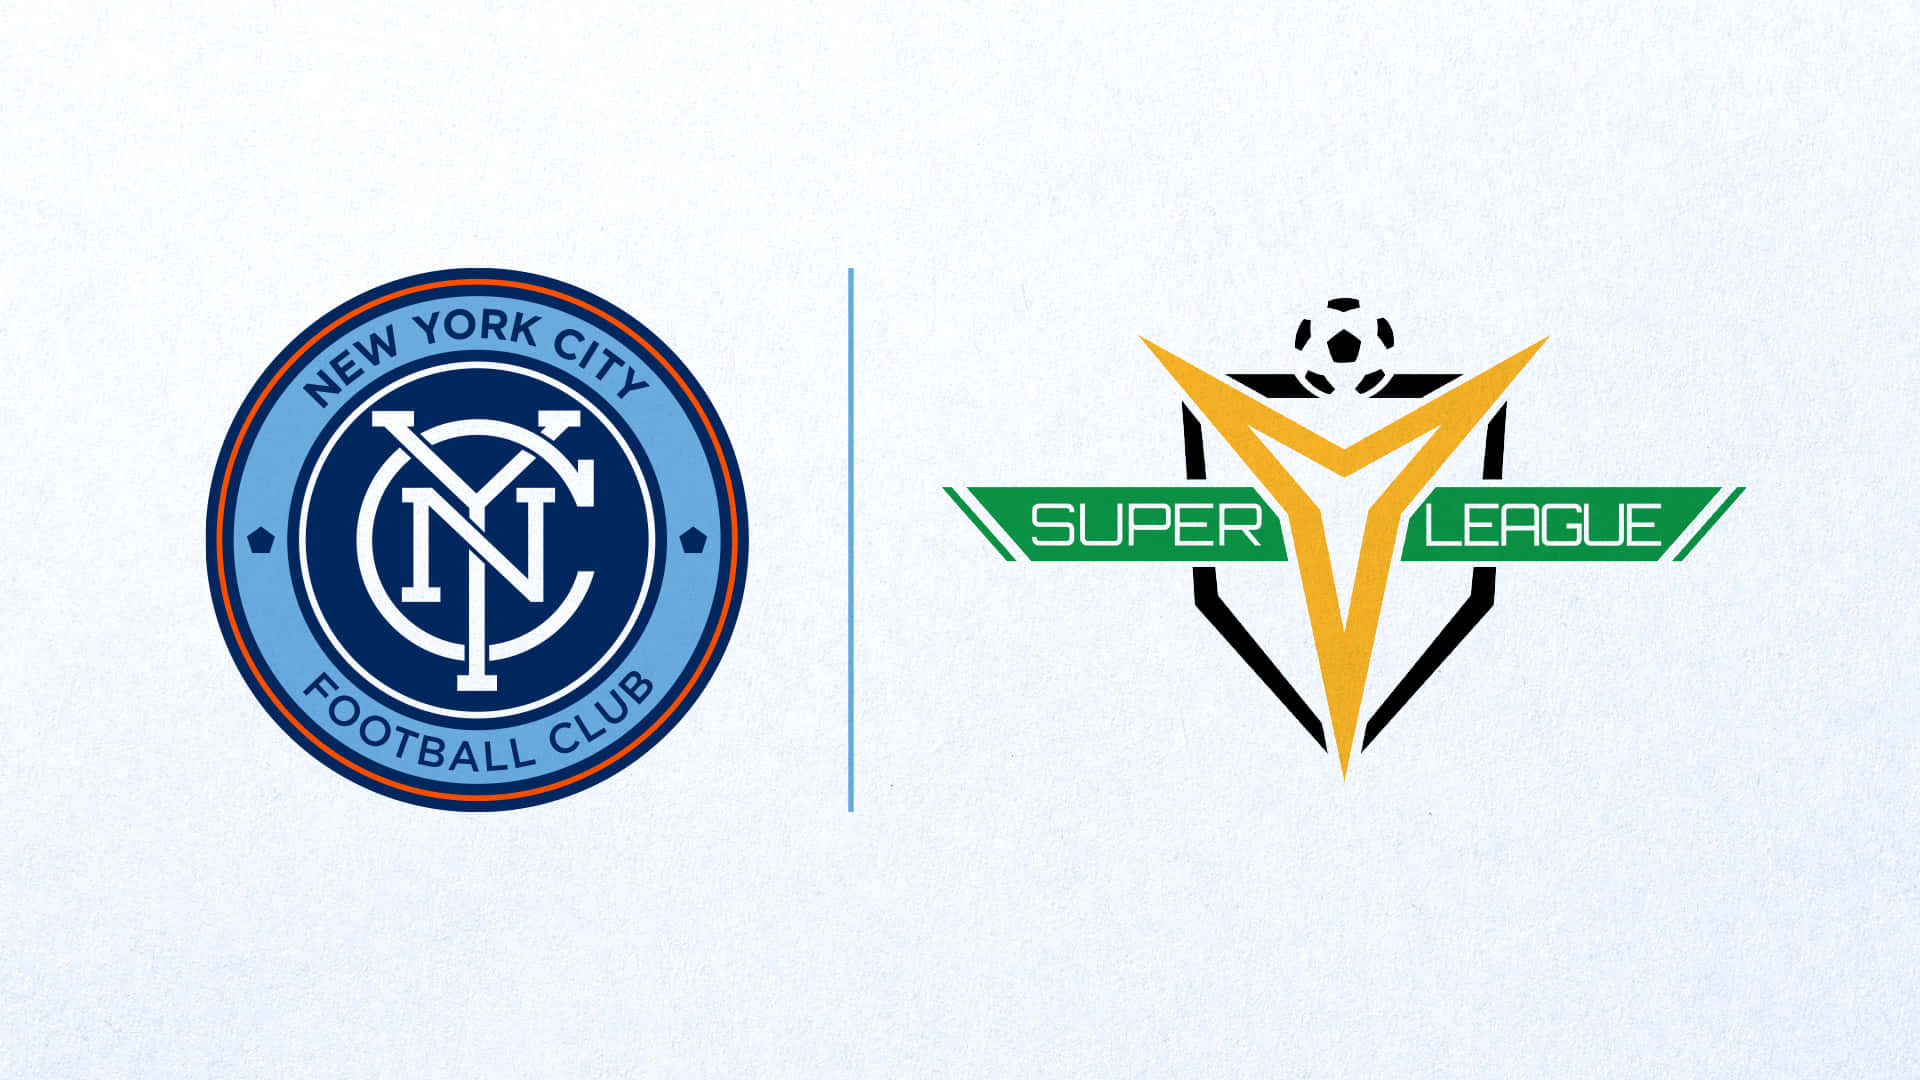 Official Logos of New York City FC and Super Y League Wallpaper